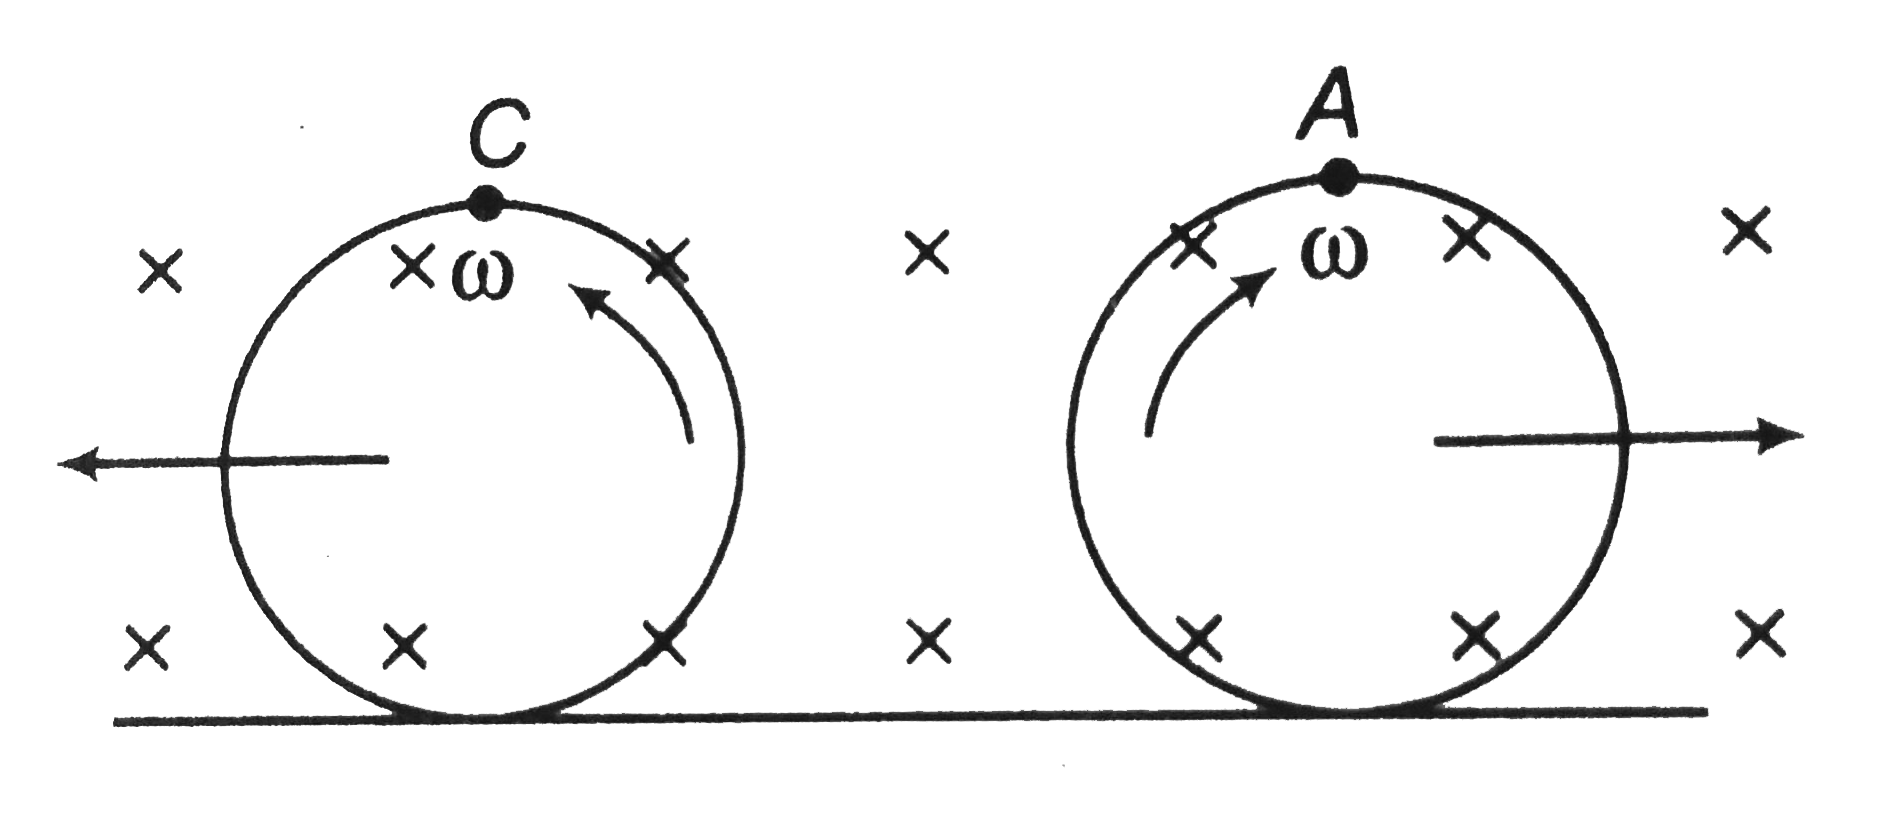 Two metallic rings of radius R are rolling on a metalilc rod. A magnetic fied of magnitude B is applied in the region. The magnitude of potential difference between points A and C on the two rings (as shown) , will be